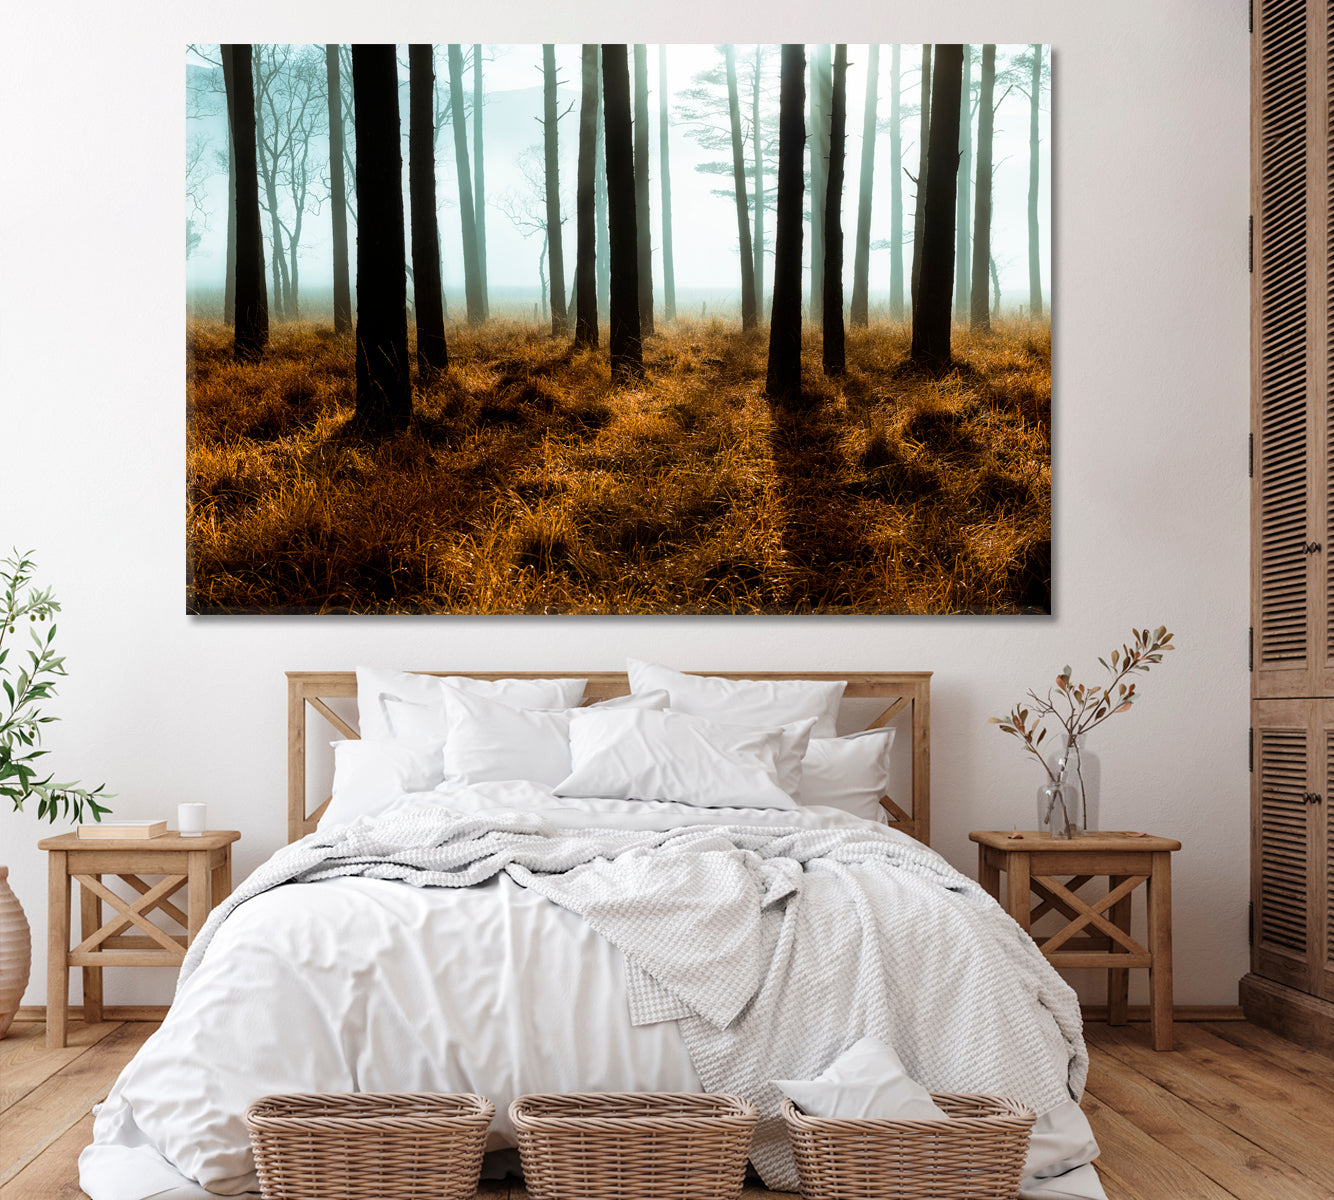 Mysterious Forest on Foggy Morning Canvas Print ArtLexy 1 Panel 24"x16" inches 